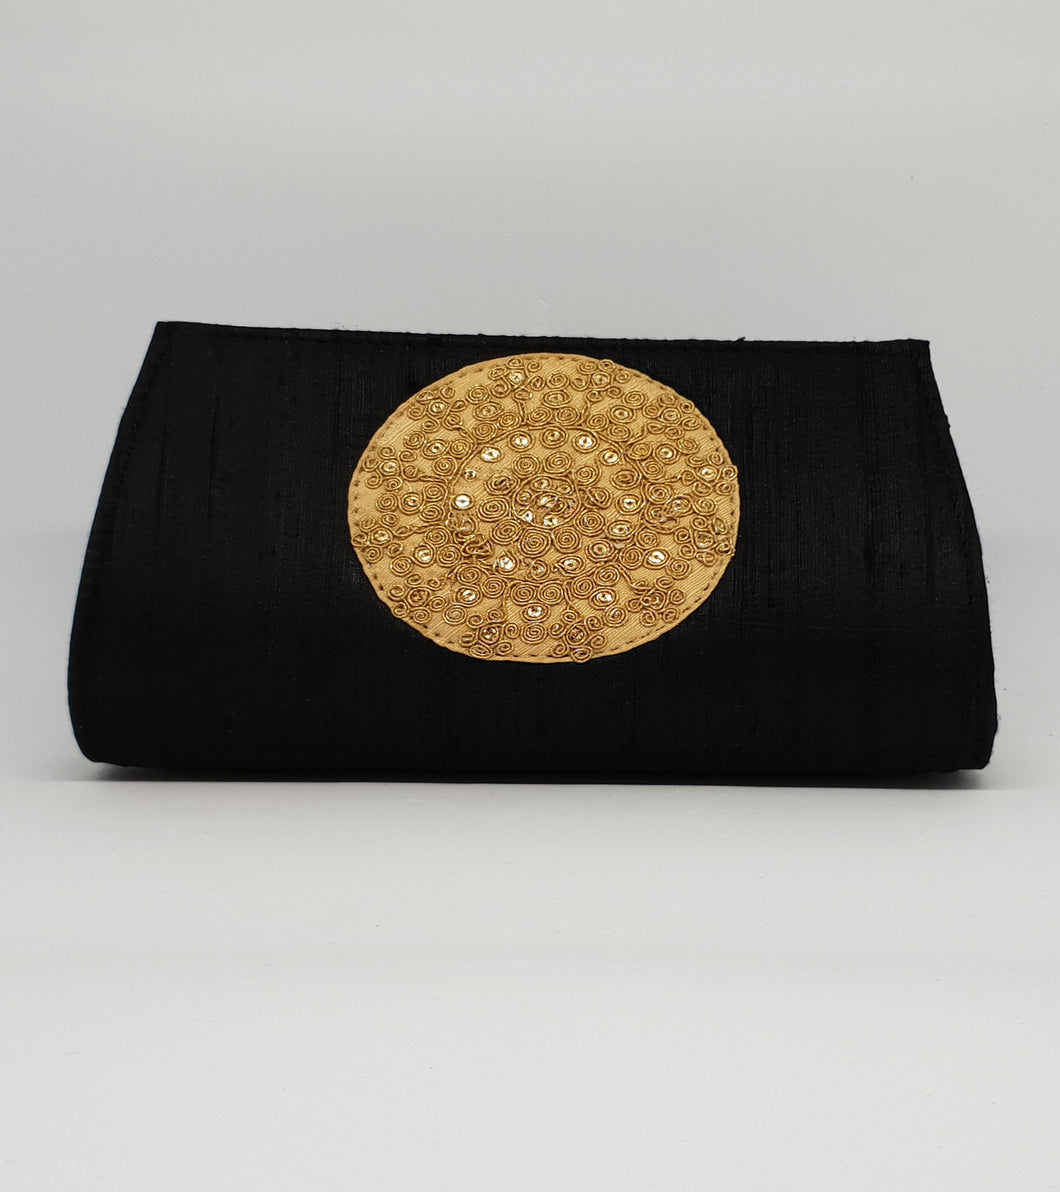 Black with Centre Gold Clutch